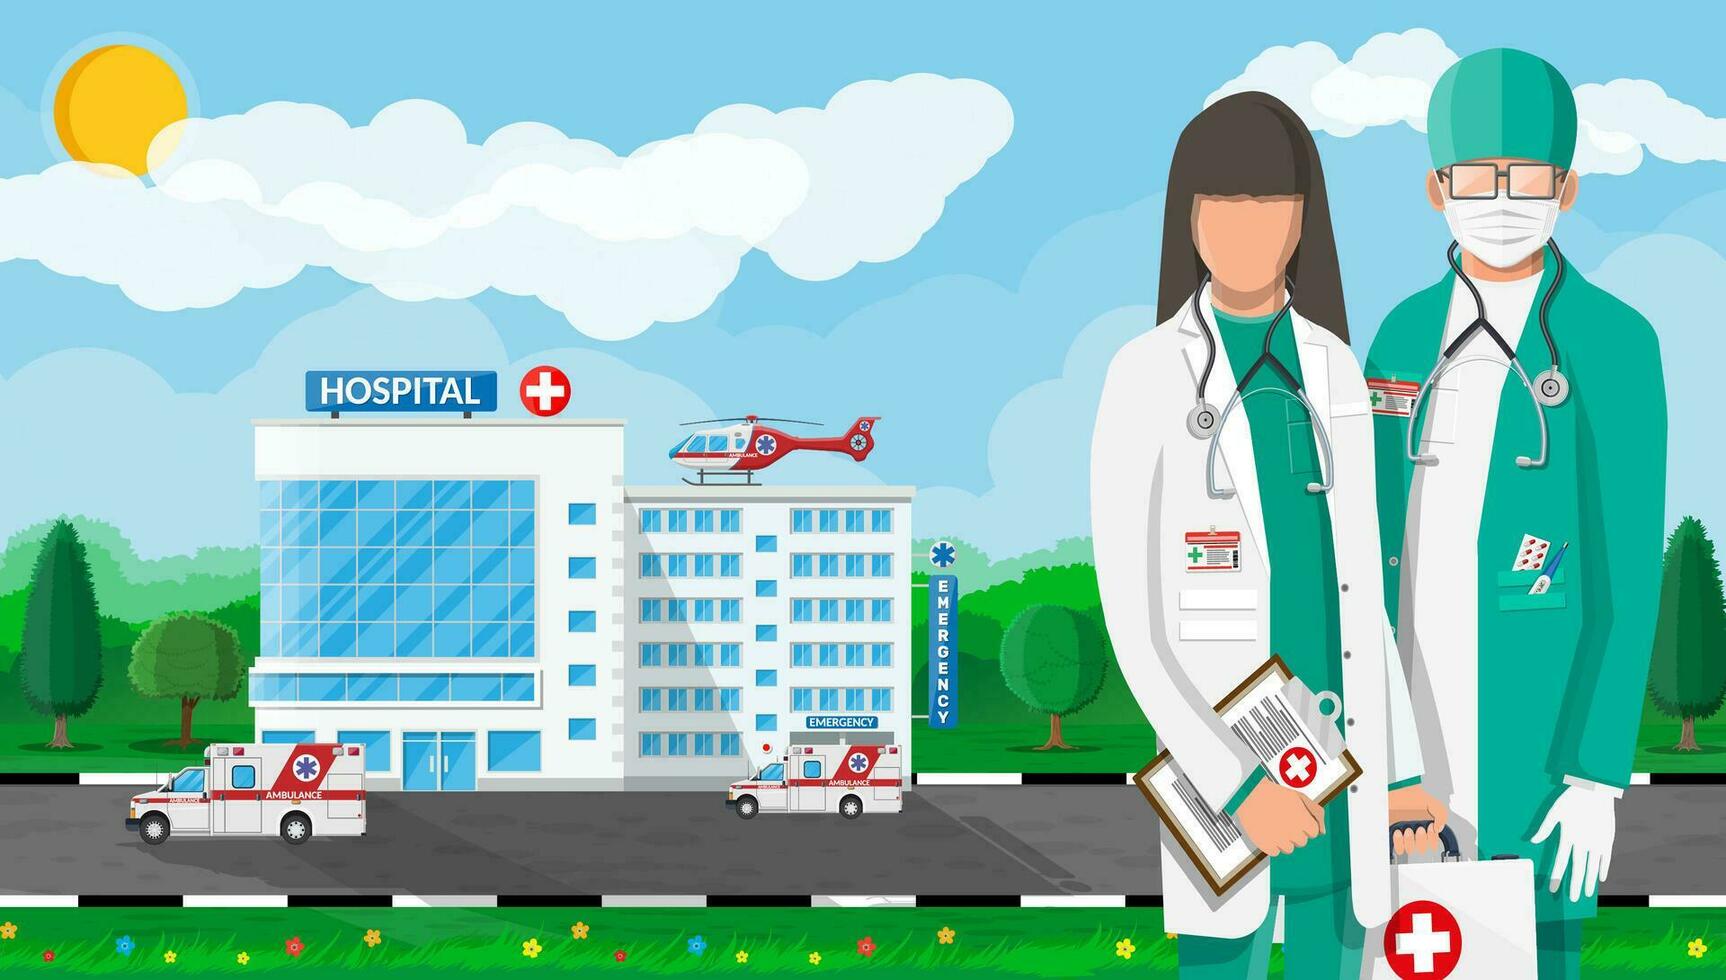 Ambulance staff concept. Hospital building, medical icon. Healthcare, hospital and medical diagnostics. Urgency and emergency services. Road, sky, tree. Car and helicopter. Flat vector illustration